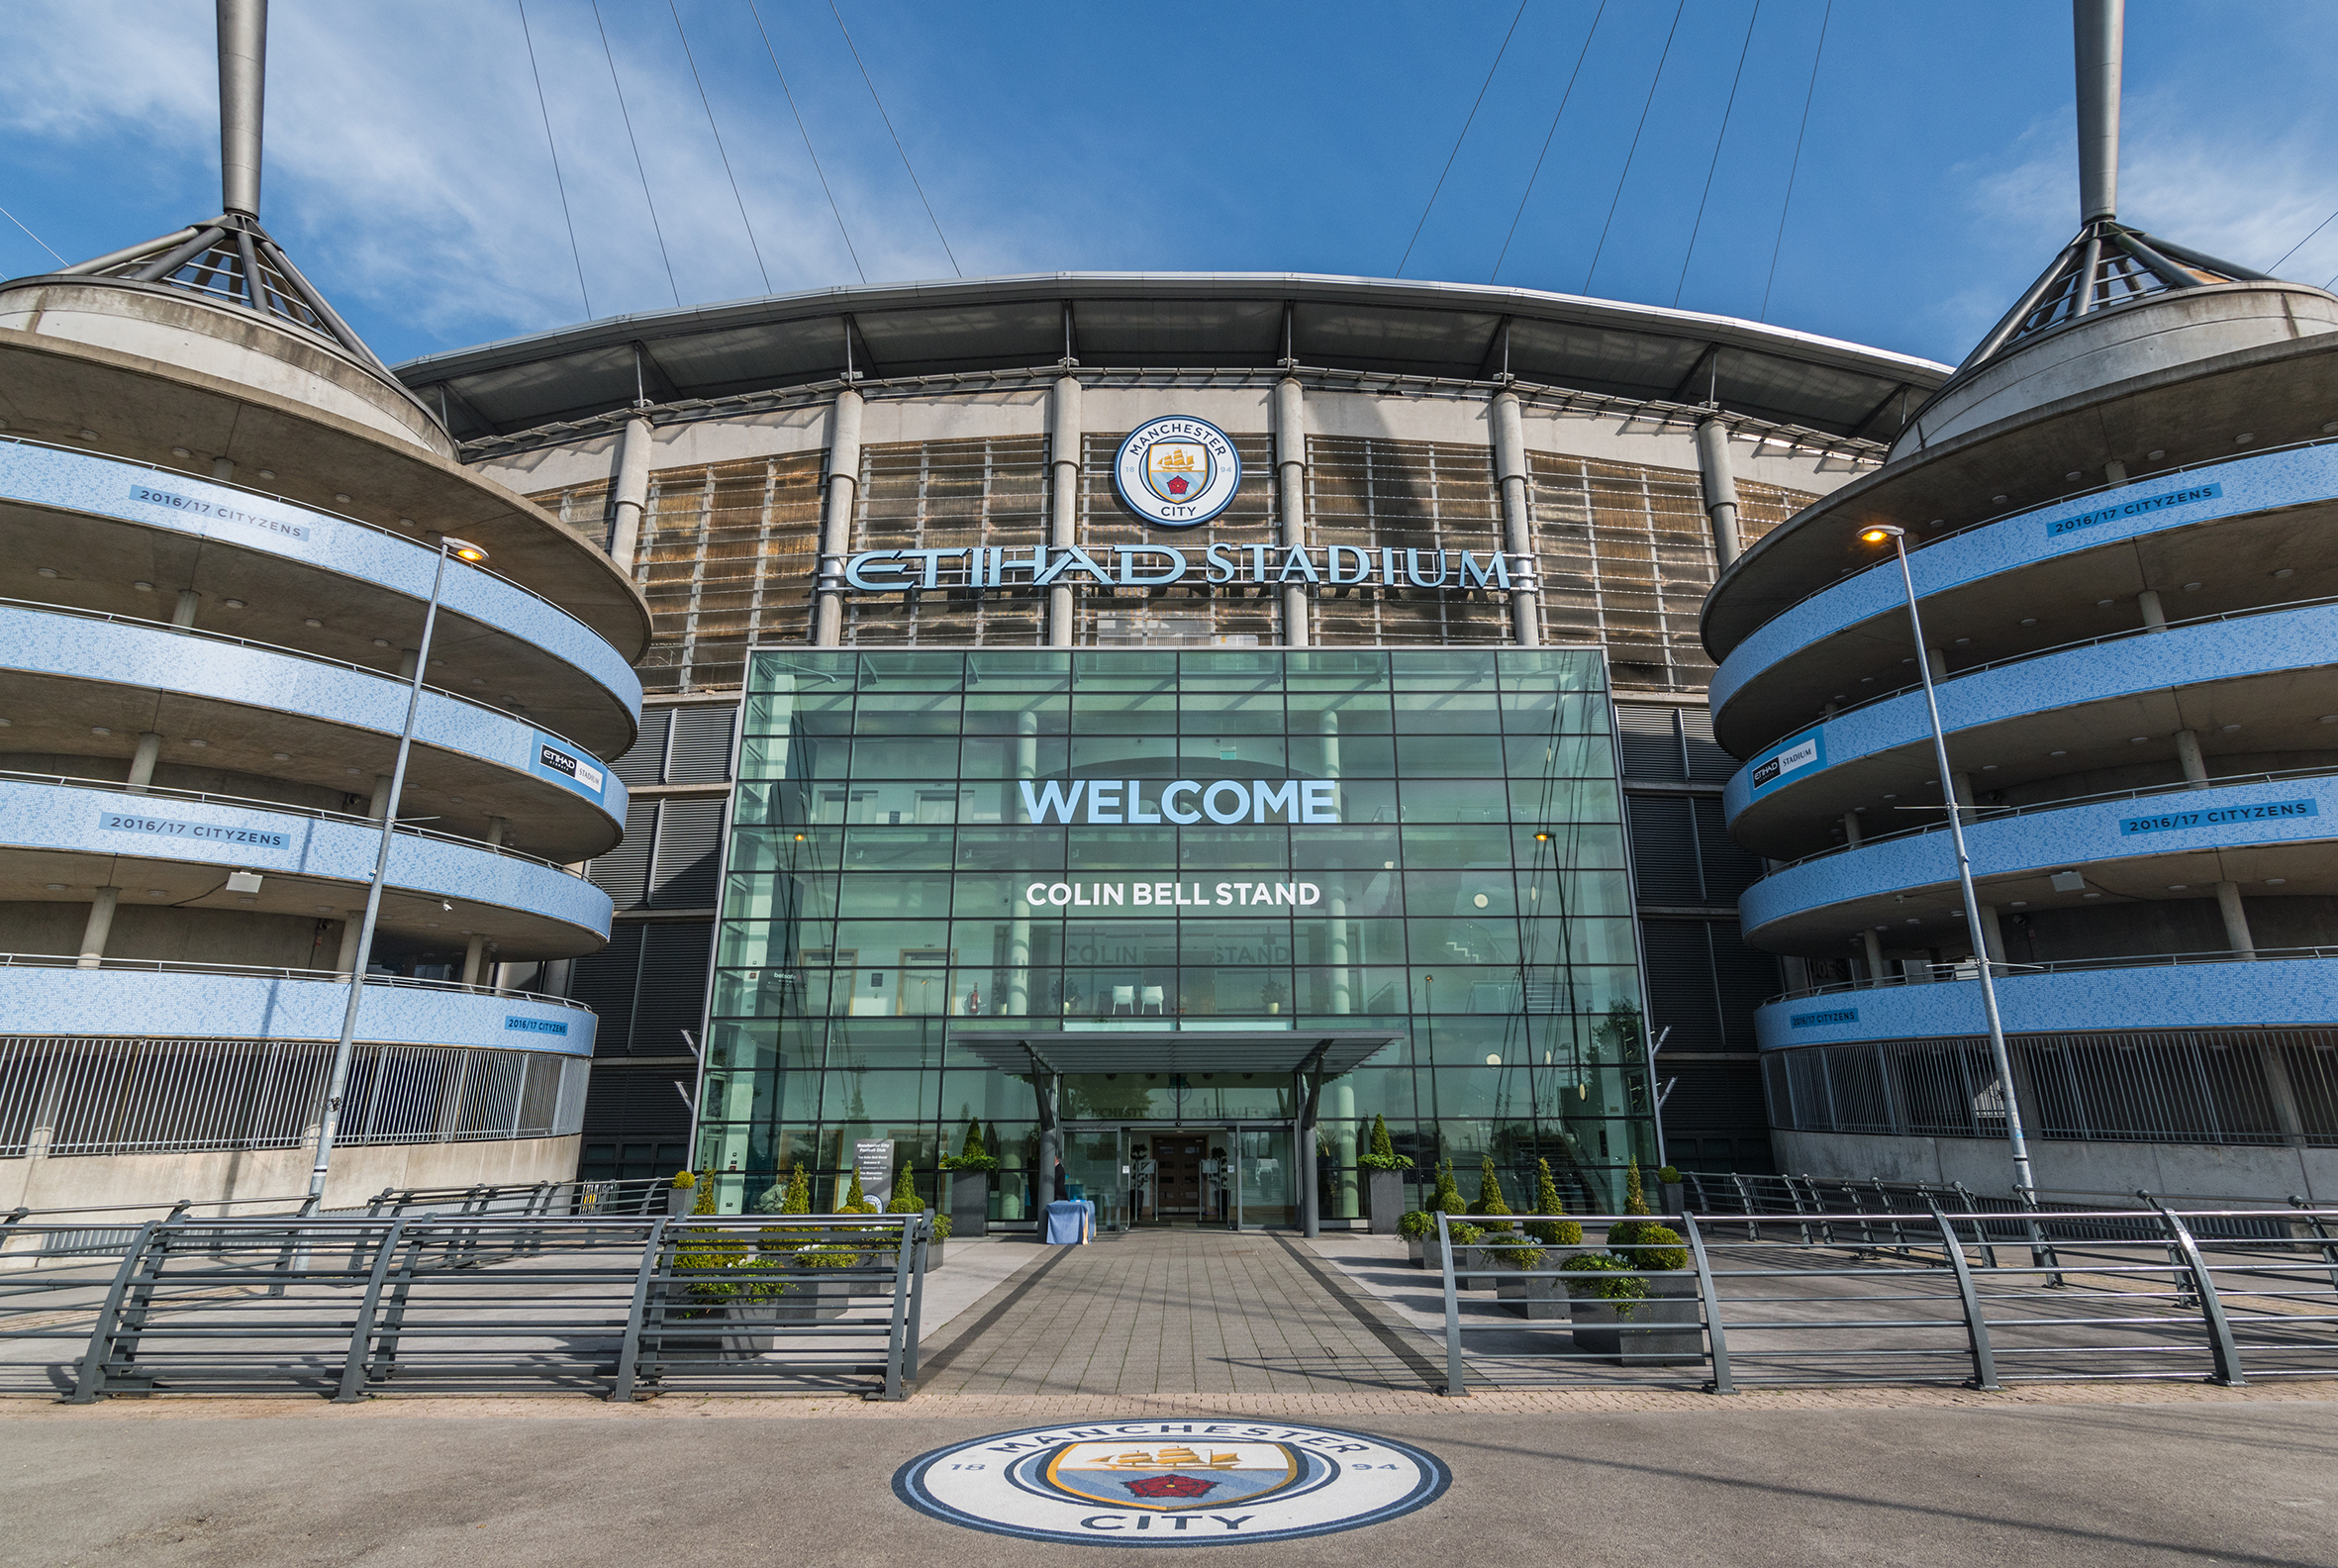 PTSG is Premier choice for Manchester City F.C.